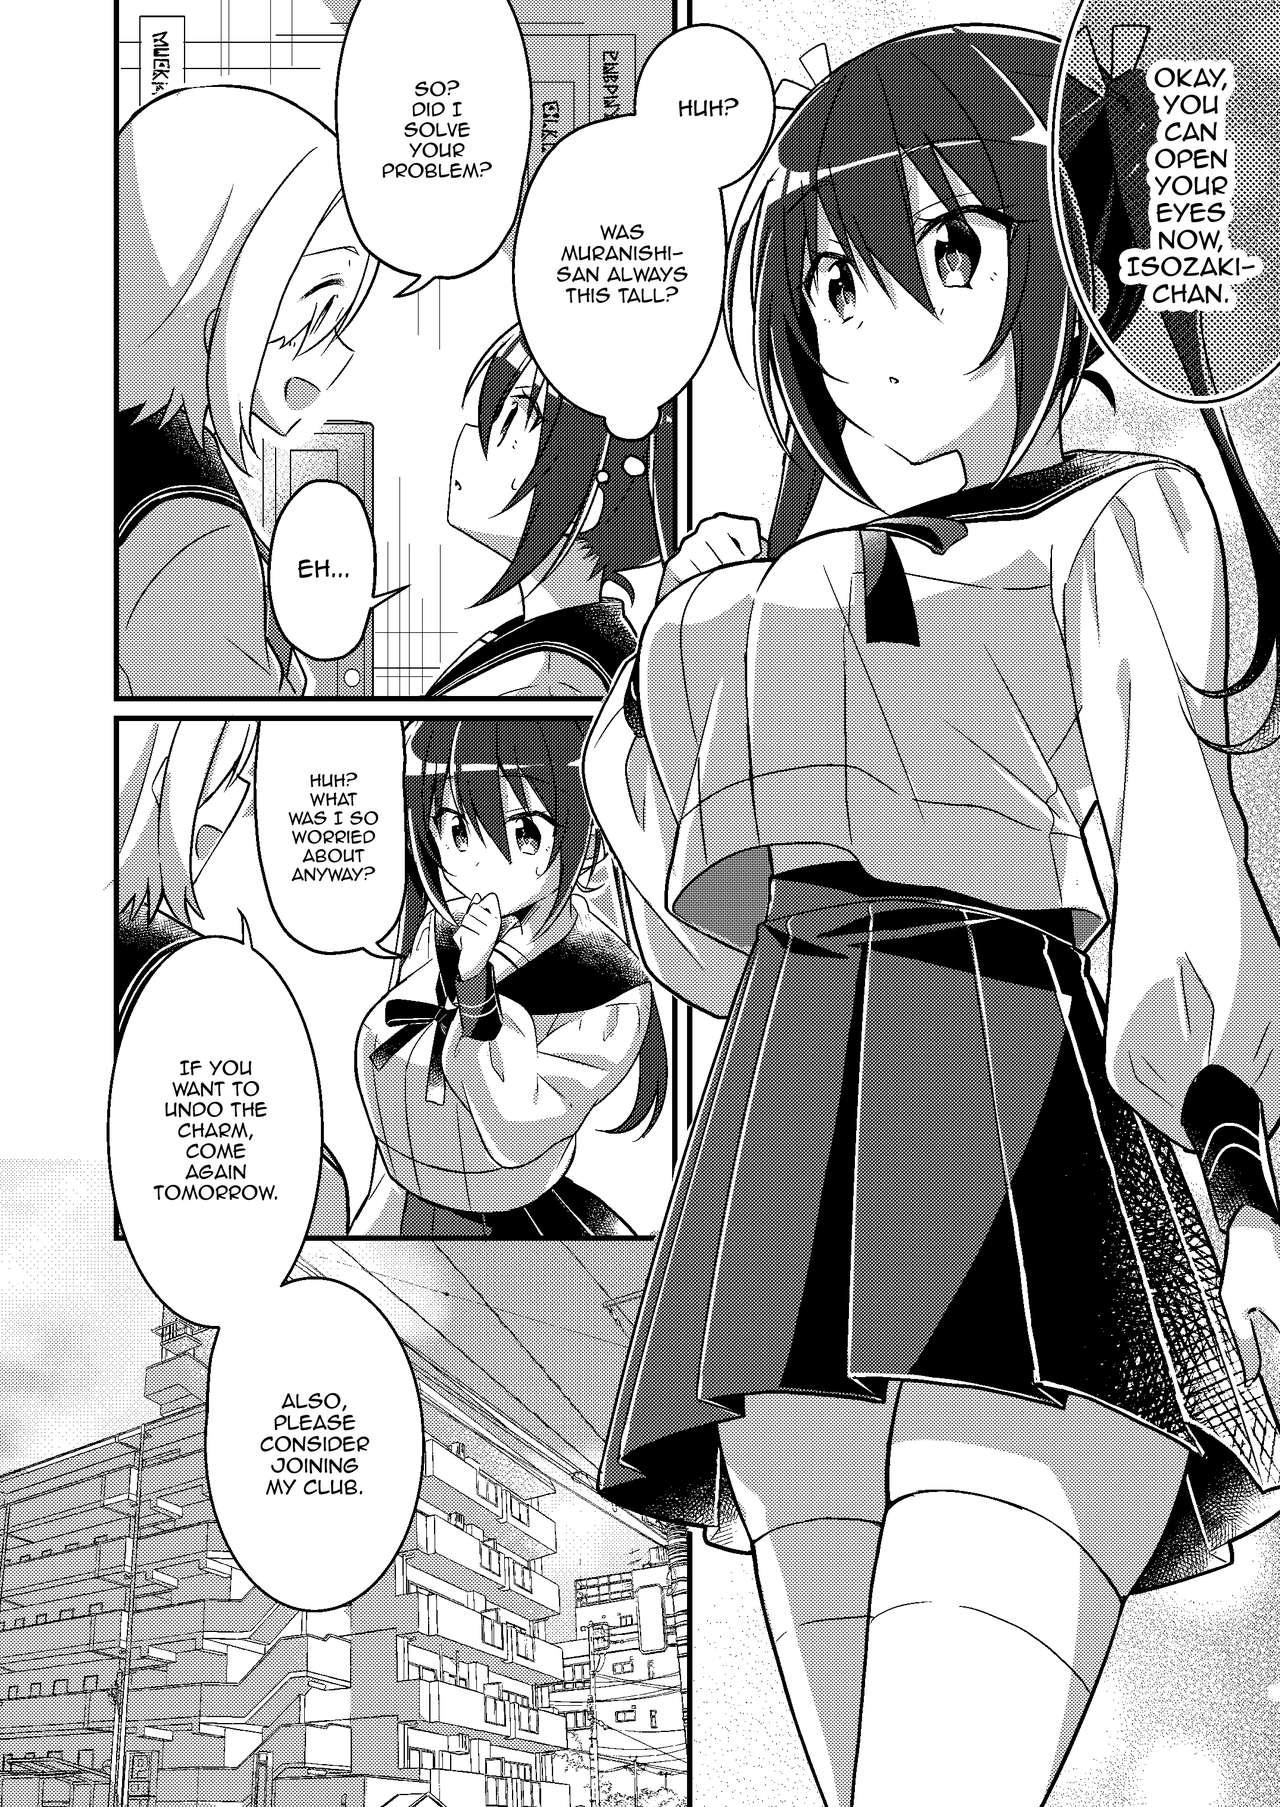 Jerking Imouto Role Change | Little Sister Role Change Scandal - Page 7